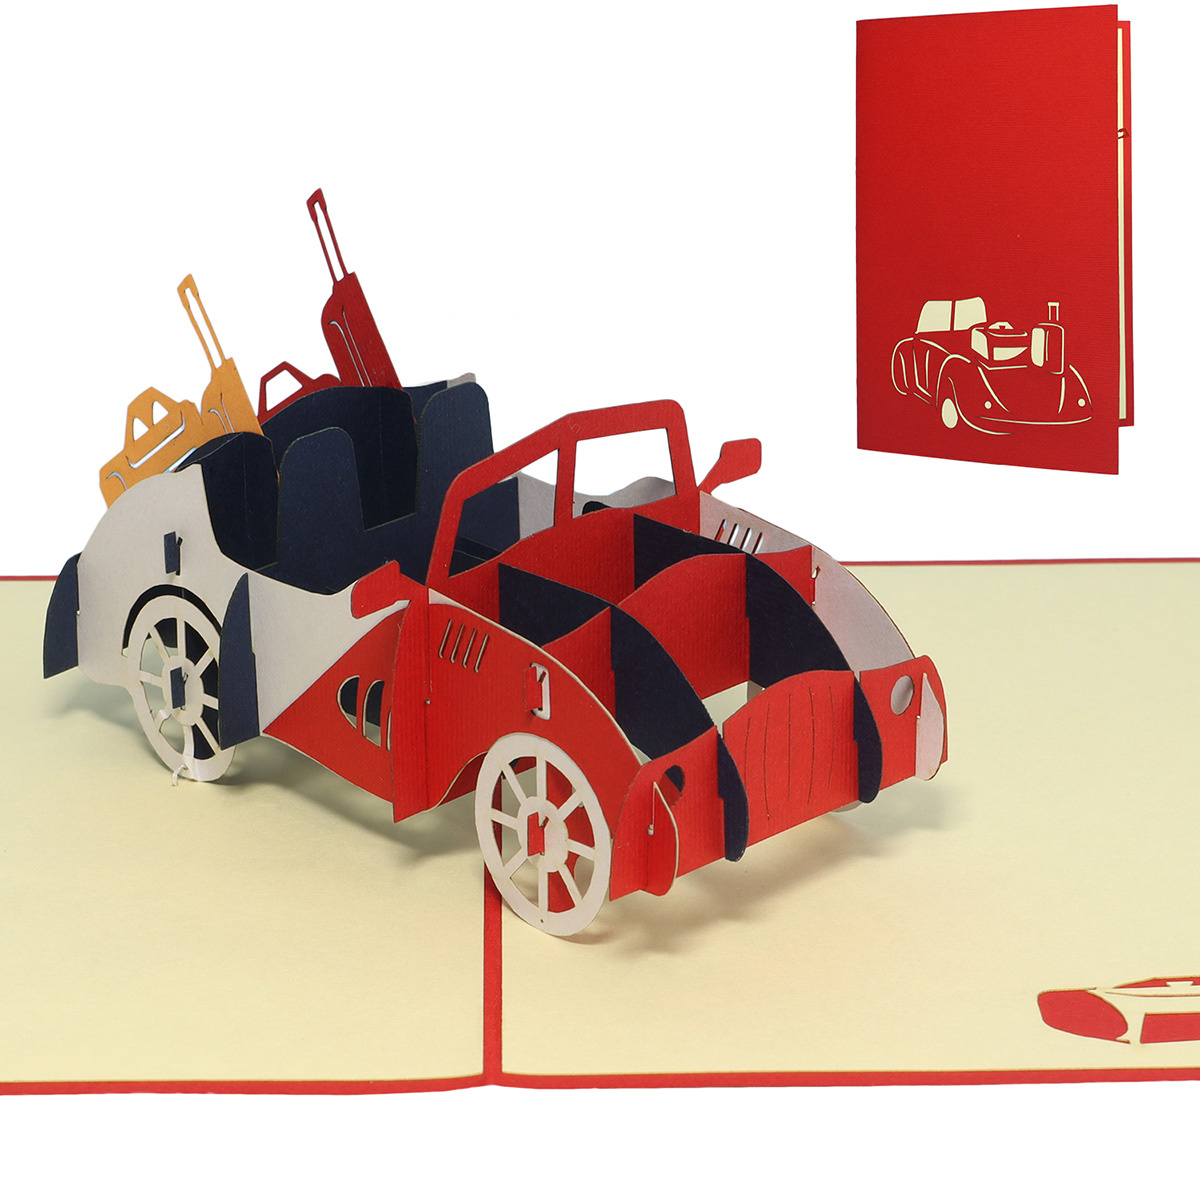 LINPOPUP Pop Up 3D Card, Birthday Card, Travel Voucher, Moving, Moving In, Greeting Card, Holiday Voucher, Car, Vintage Car, LIN17379, LINPopUp®, N252